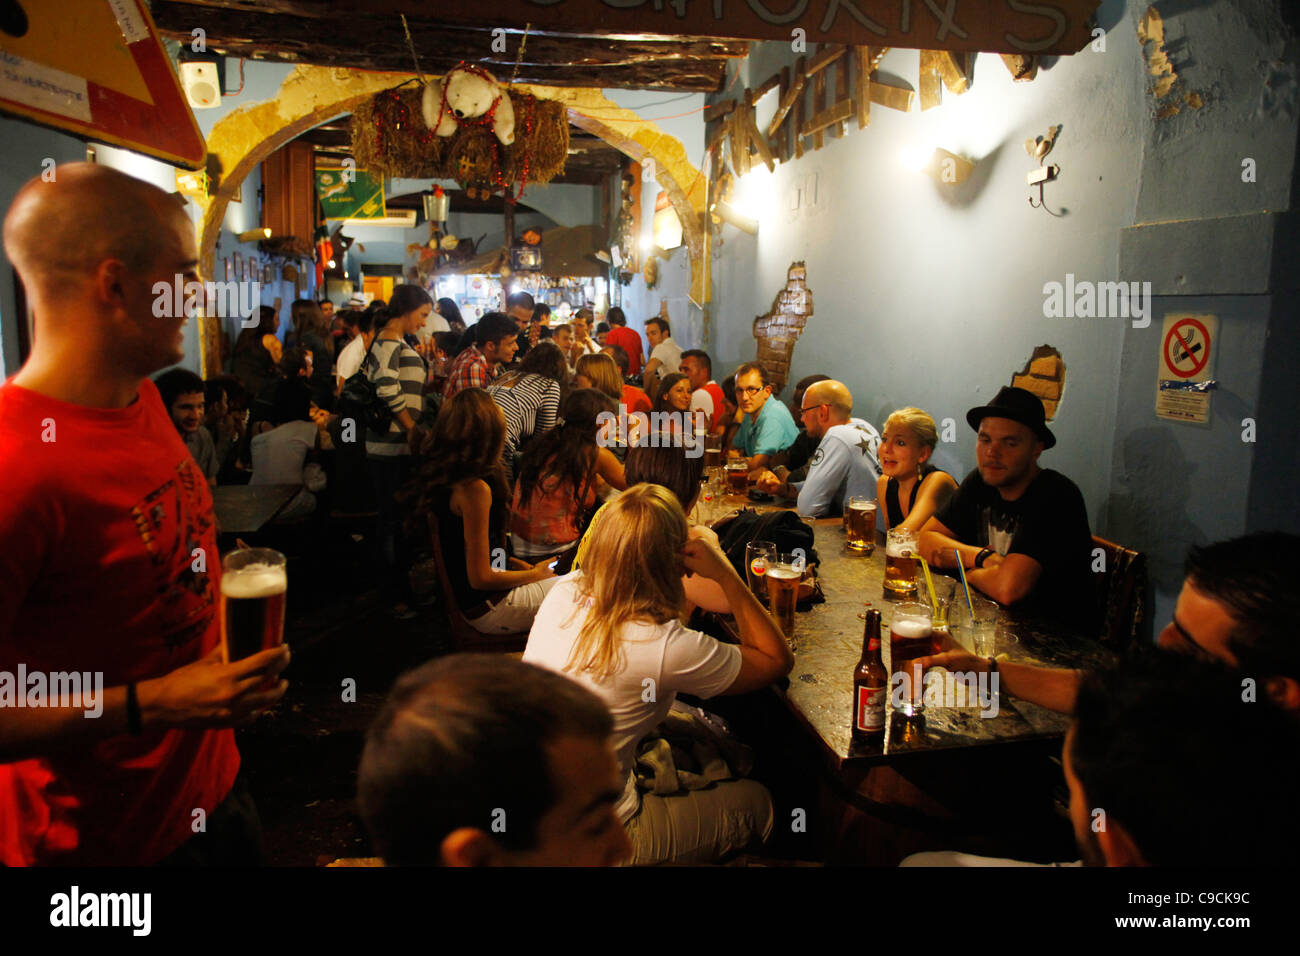 Young people at Oghorn's Bar in coso Vittorio Emanuele st., Cagliari, Sardinia, Italy. Stock Photo